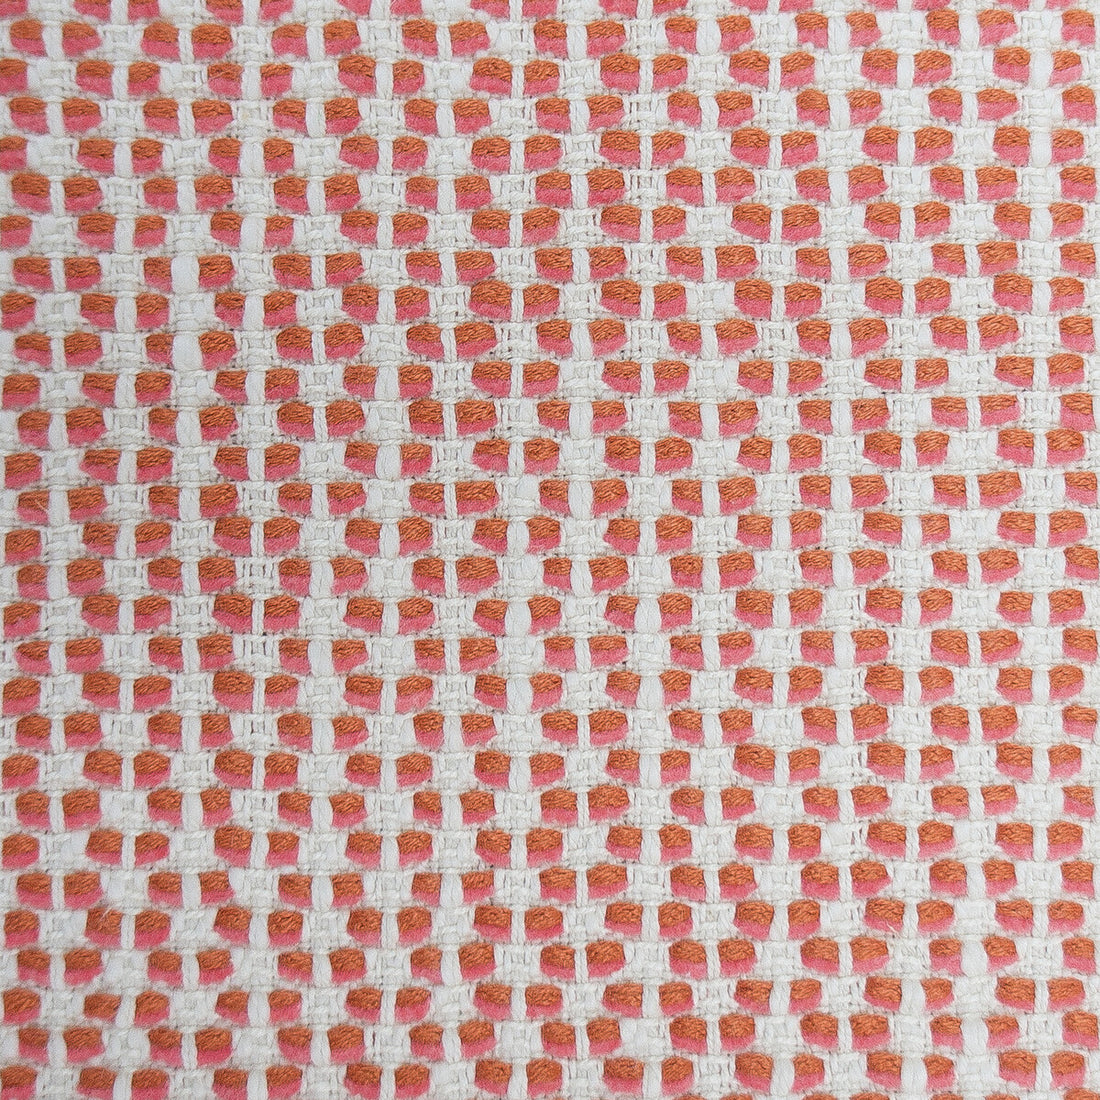 Palenque fabric in naranja color - pattern GDT5595.004.0 - by Gaston y Daniela in the Gaston Nuevo Mundo collection